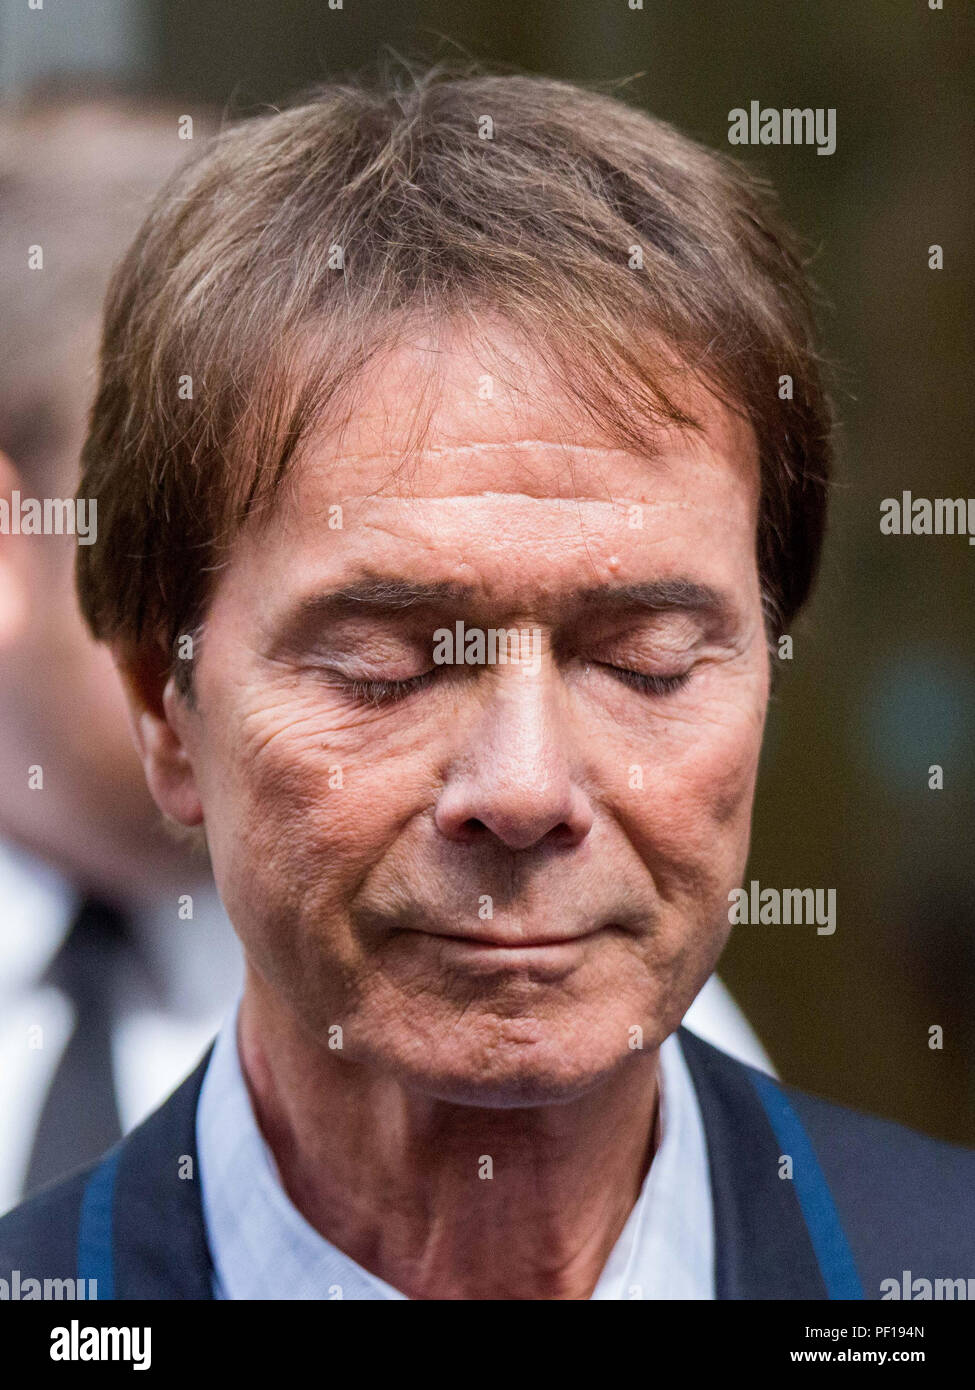 Sir Cliff Richard, former singer, leaves the High Court of Justice winning a ruling for damages from the BBC following coverage of a police raid on his home.  Featuring: Sir Cliff Richard Where: London, England, United Kingdom When: 18 Jul 2018 Credit: Wheatley/WENN Stock Photo